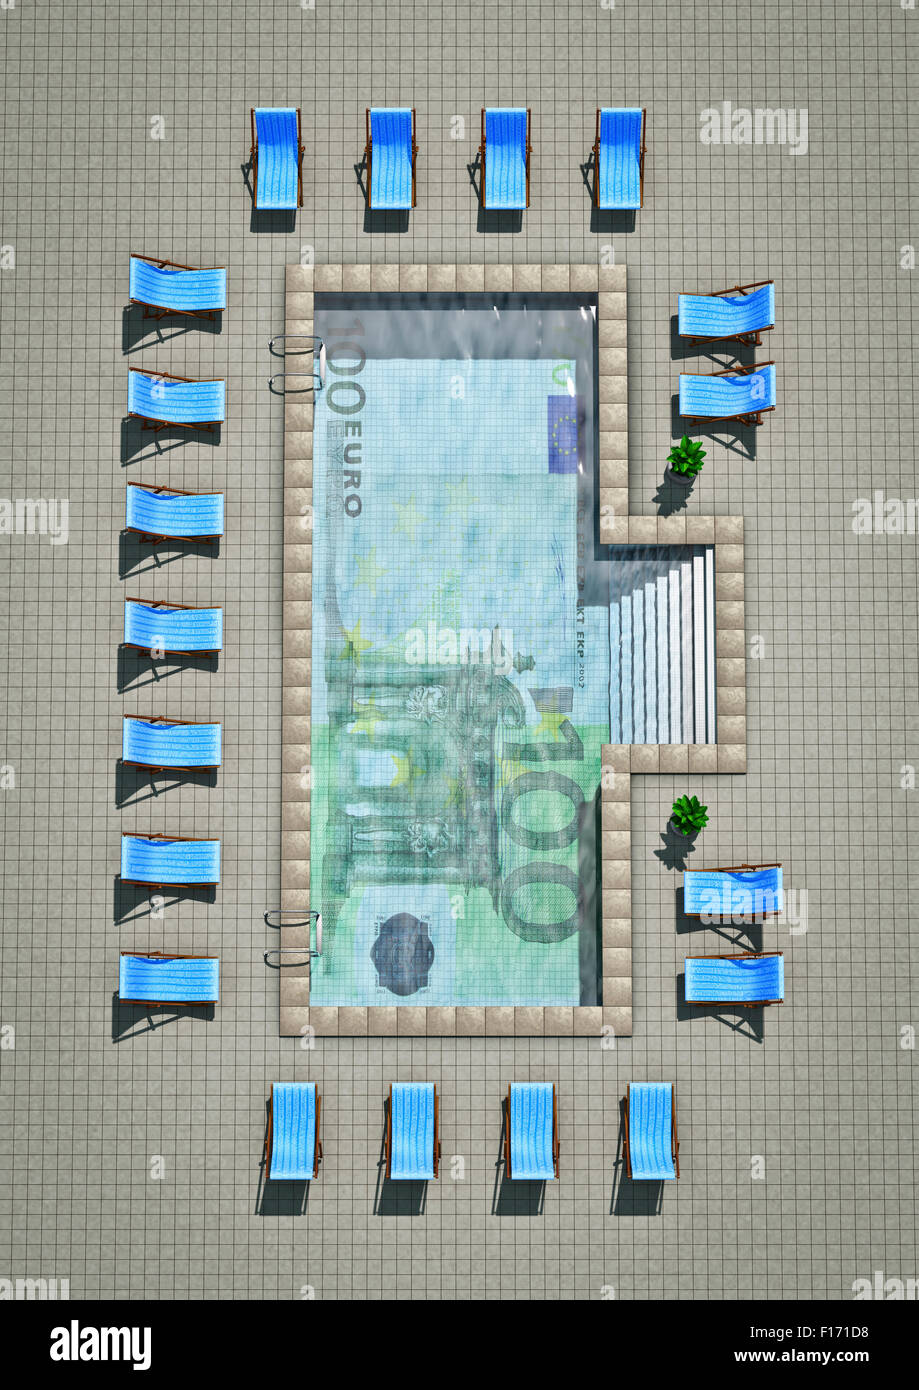 Euro pool / 3D render of swimming pool with hundred euro note tiled on bottom Stock Photo